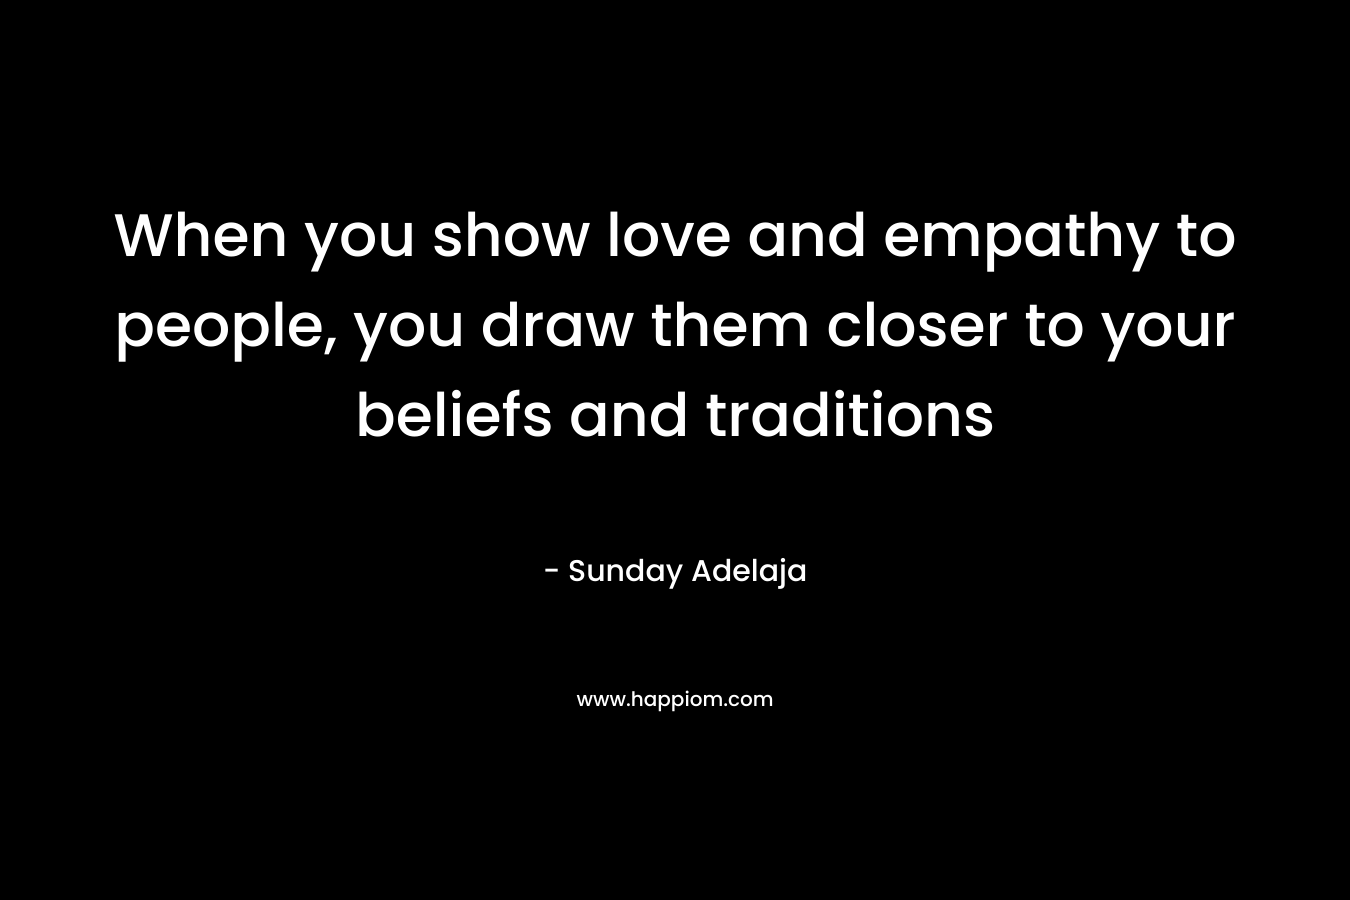 When you show love and empathy to people, you draw them closer to your beliefs and traditions